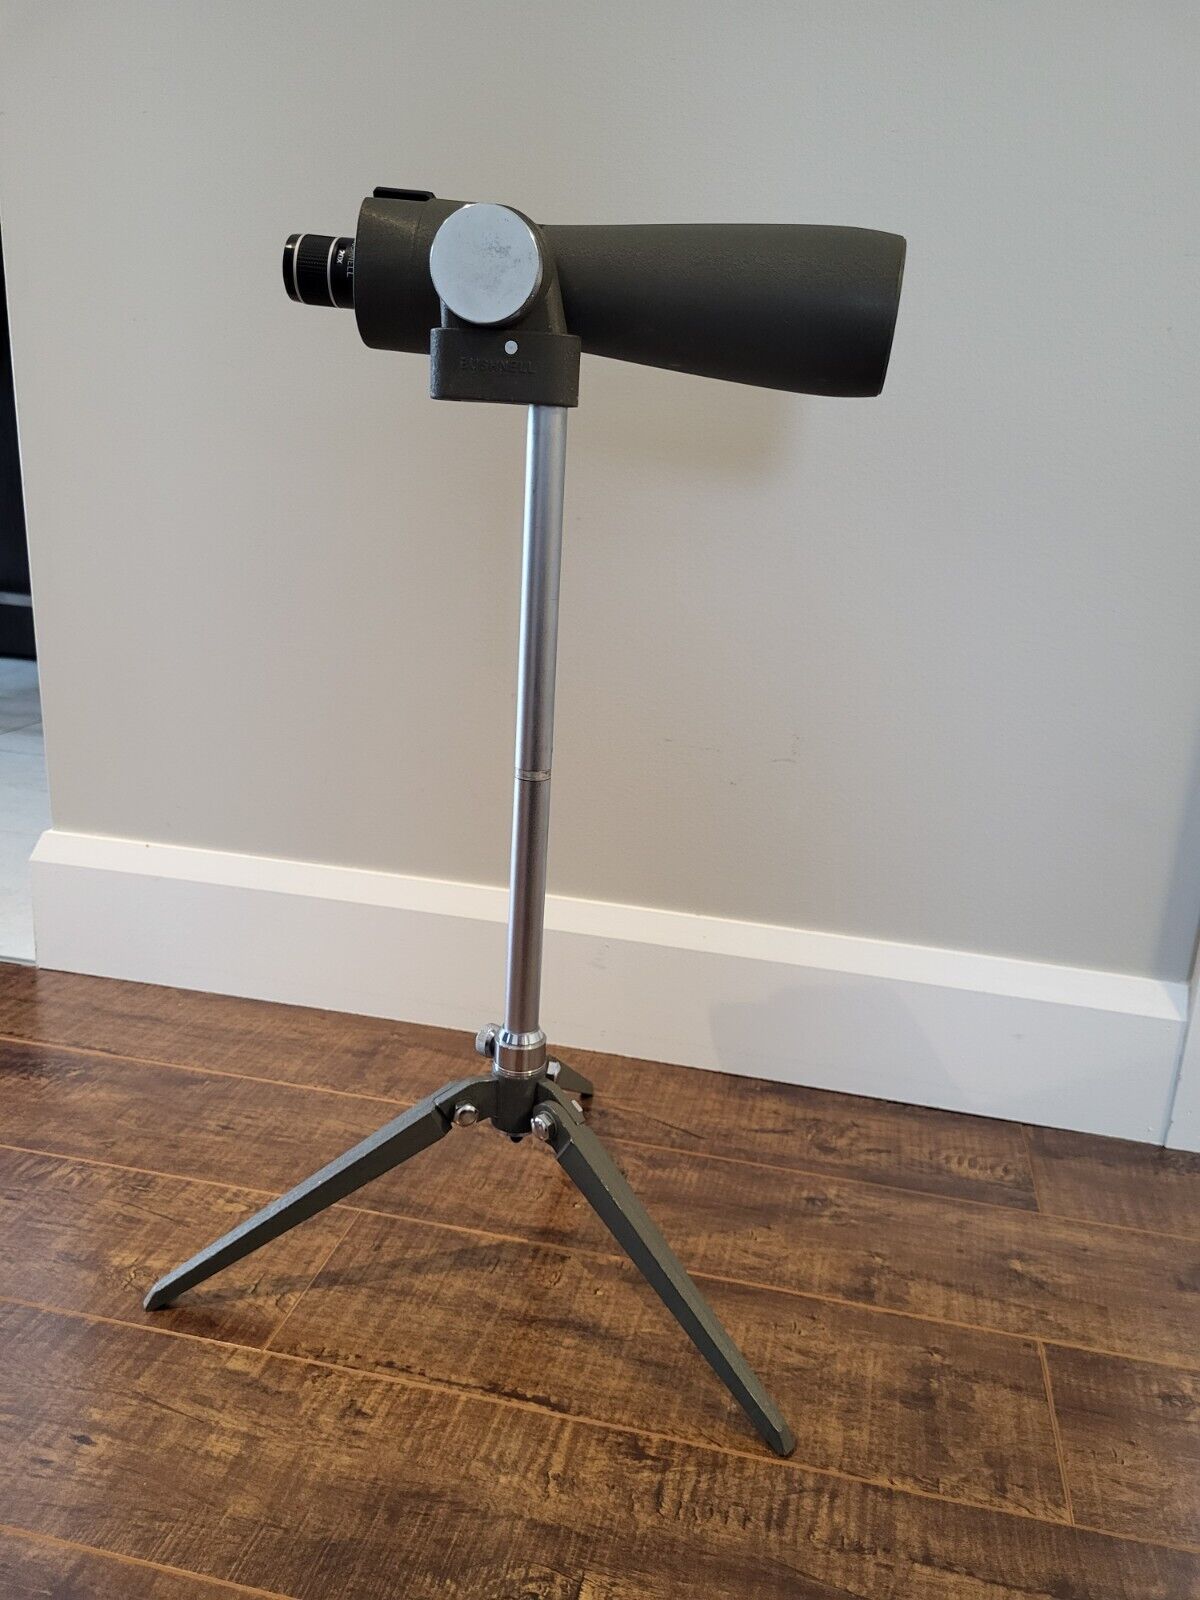 ( 1 )  Bushnell Spacemaster II Spotting Scope Telescope with Tripod 20X to 45X